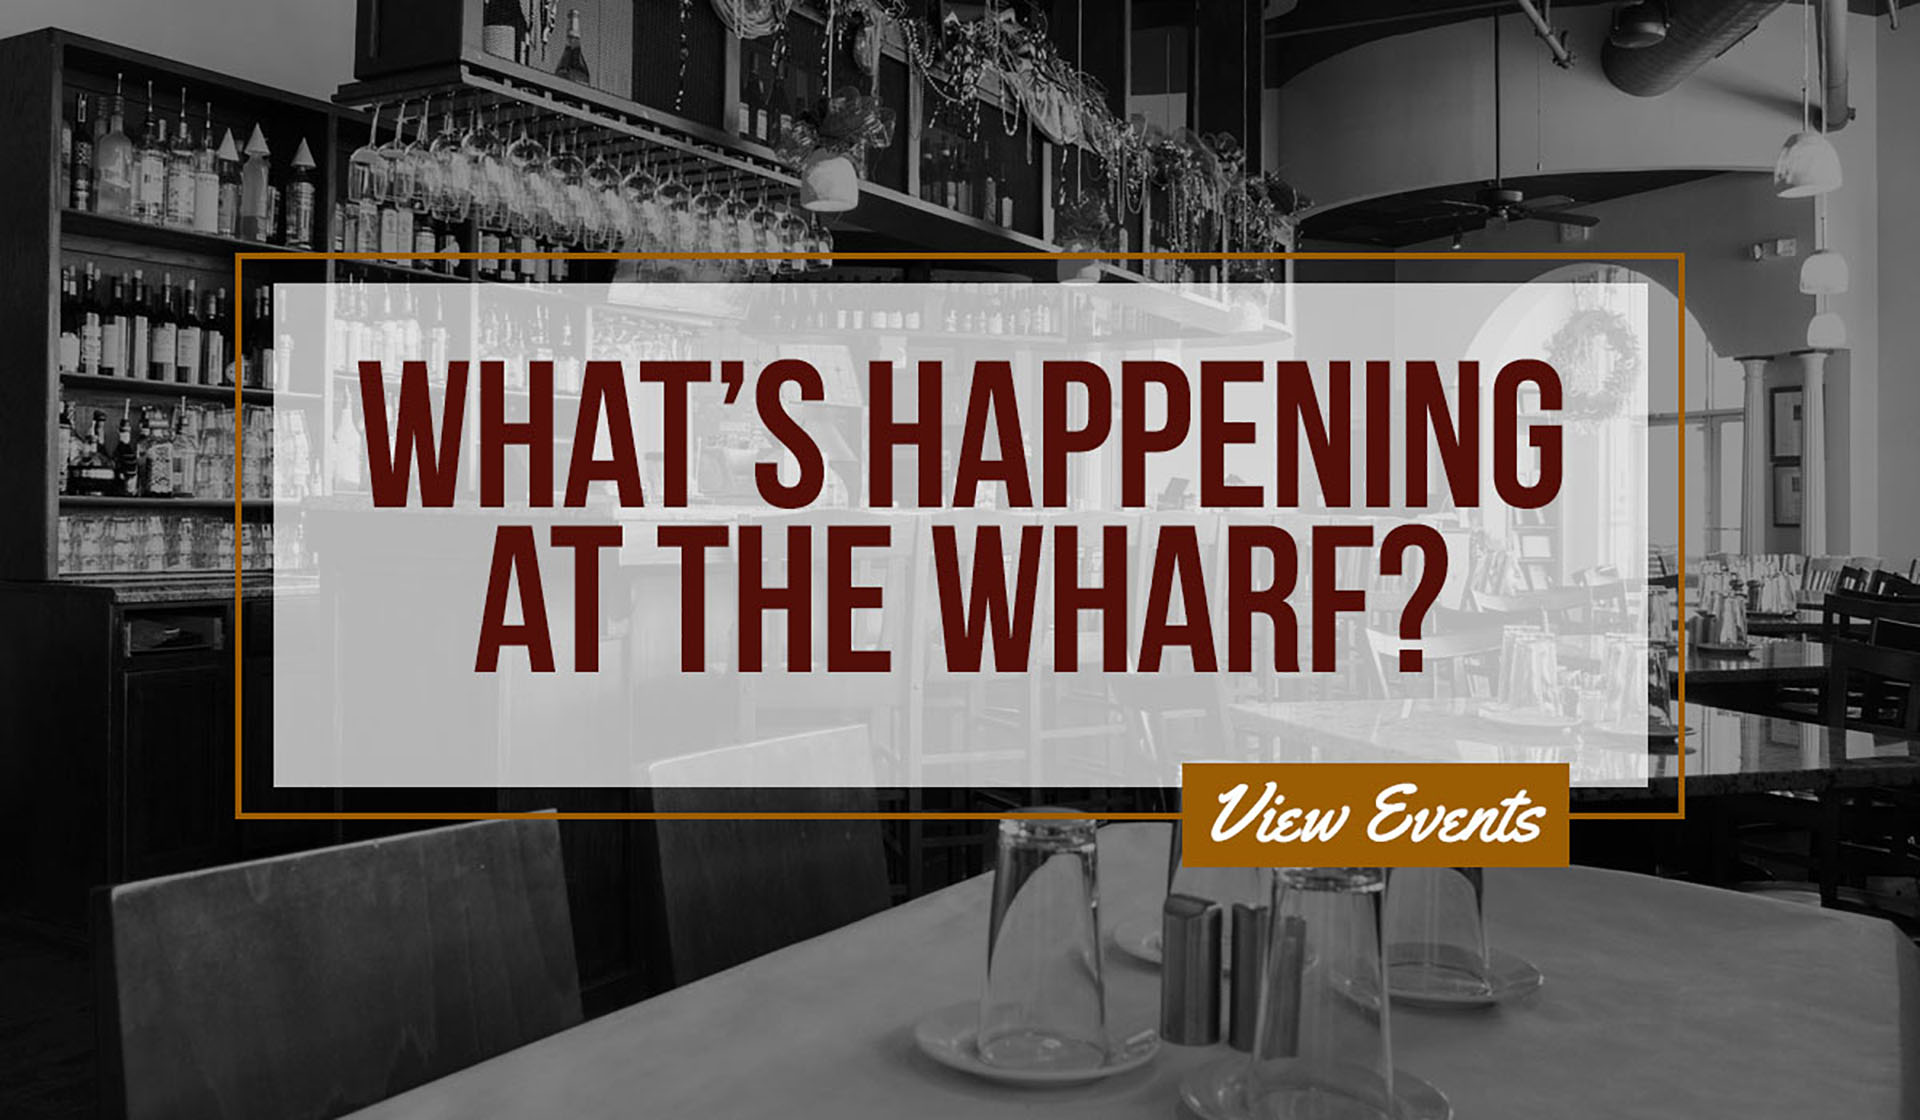 Upcoming events at The Wharf